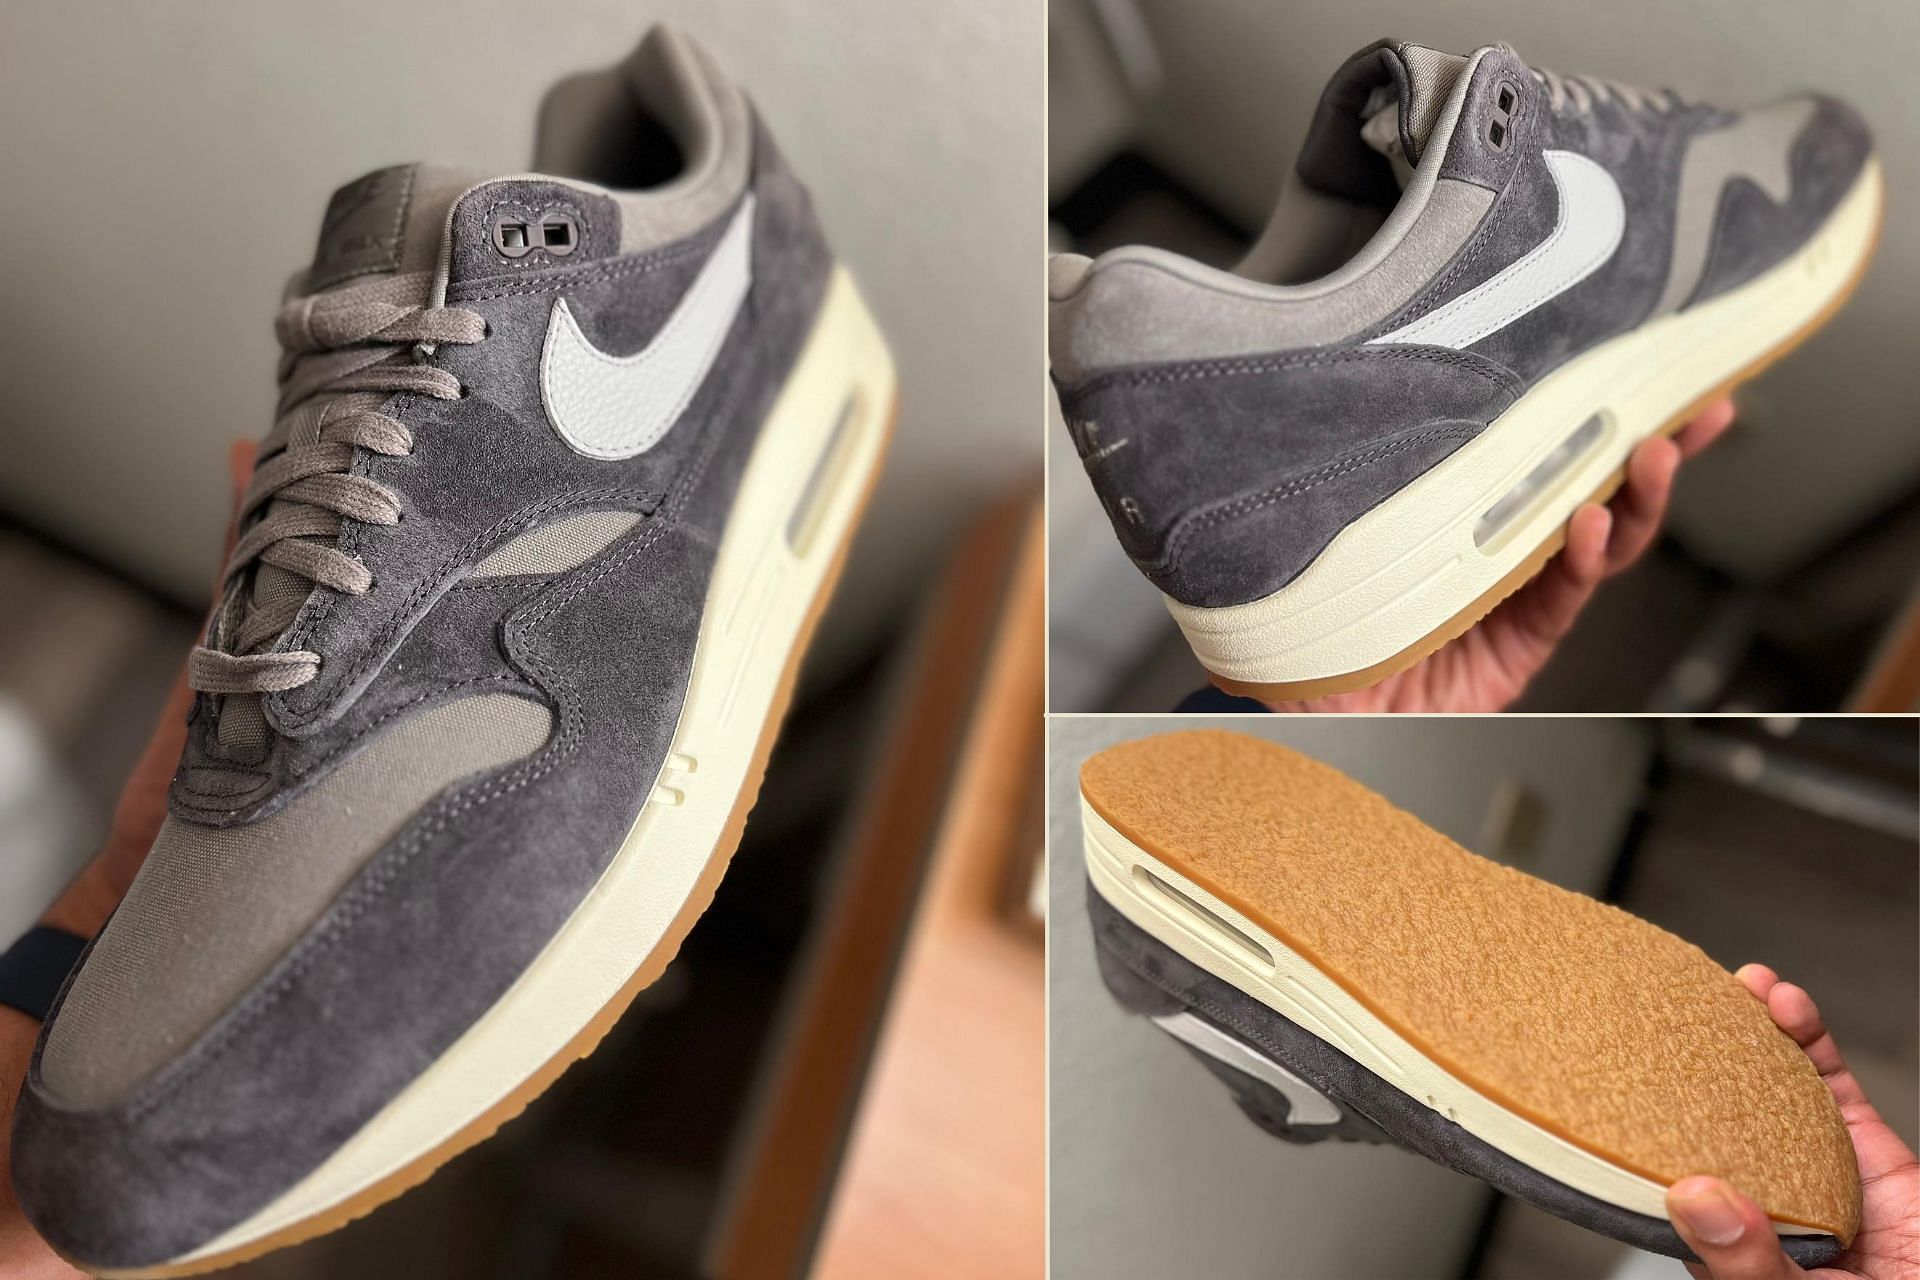 Nike Air "Soft Grey" sneakers: Where to buy, and more explored